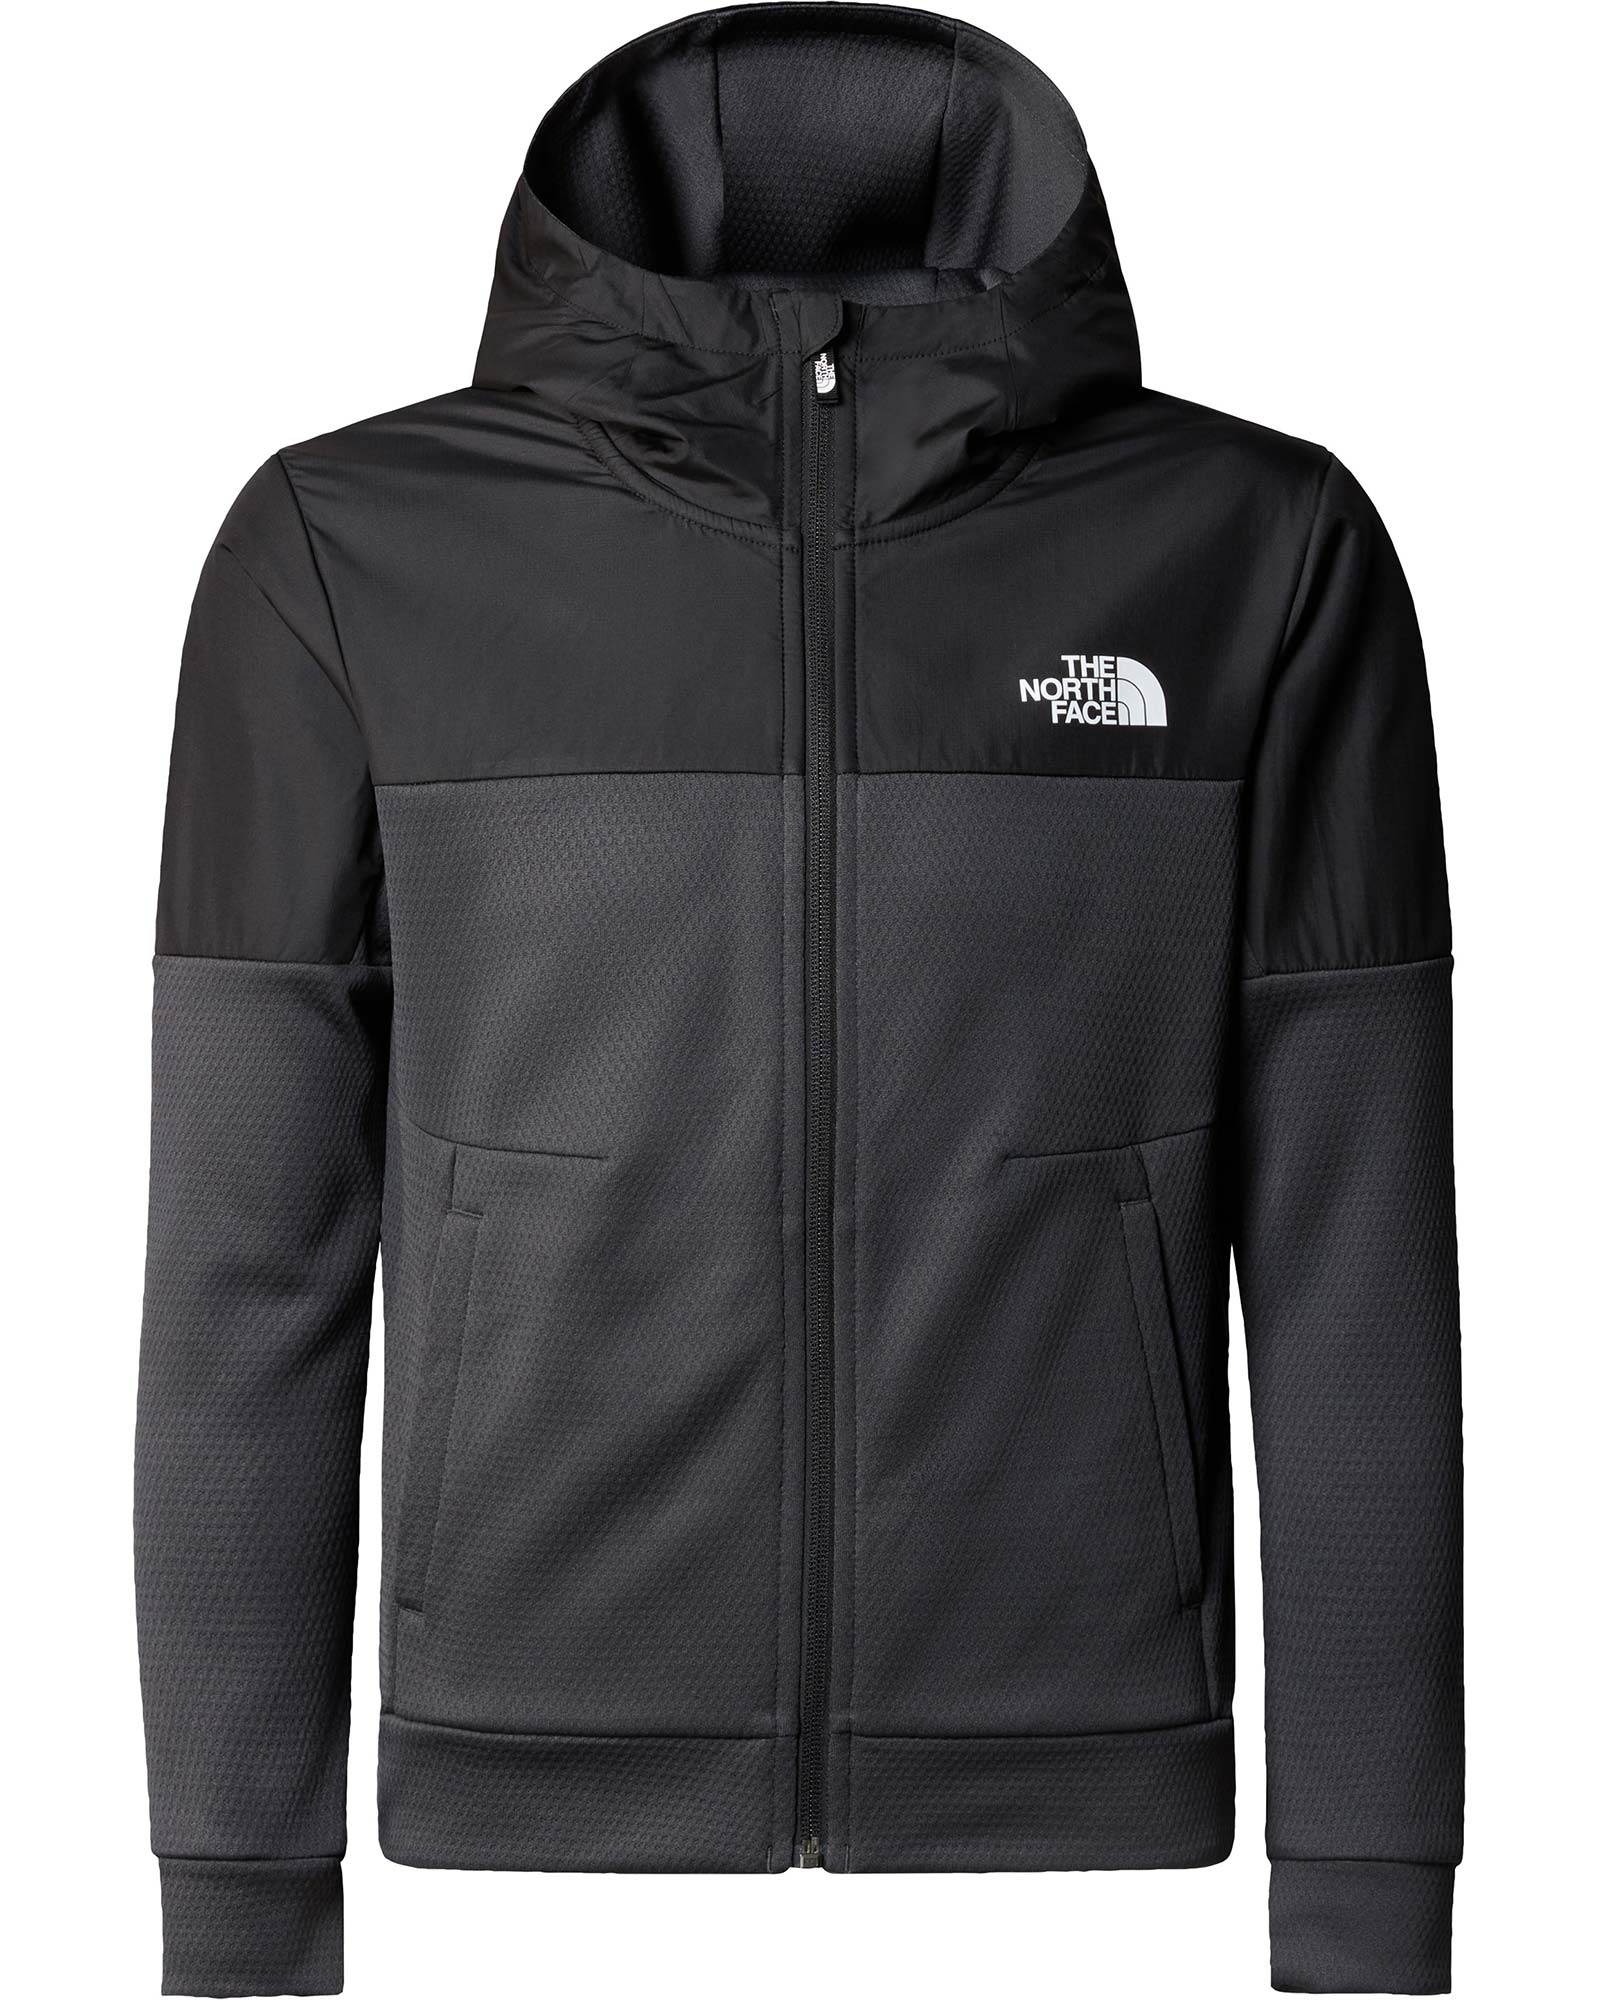 The North Face Boy's Mountain Athletics Full Zip Hoodie